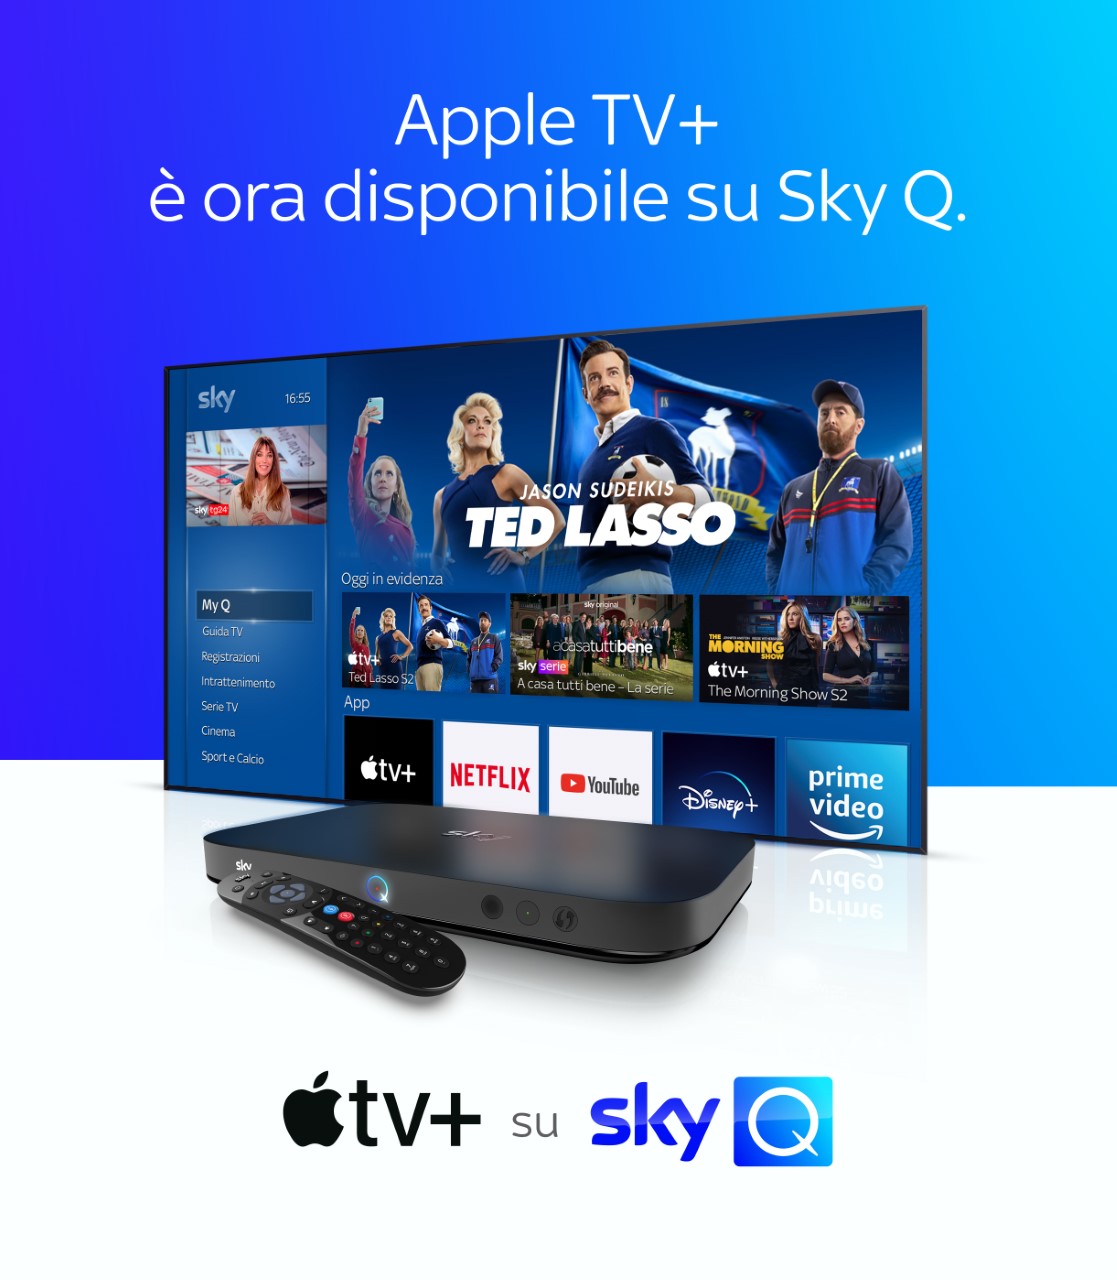 Apple TV + arrives in Sky Q also in Italy: just in time to bring your Christmas gift ideas